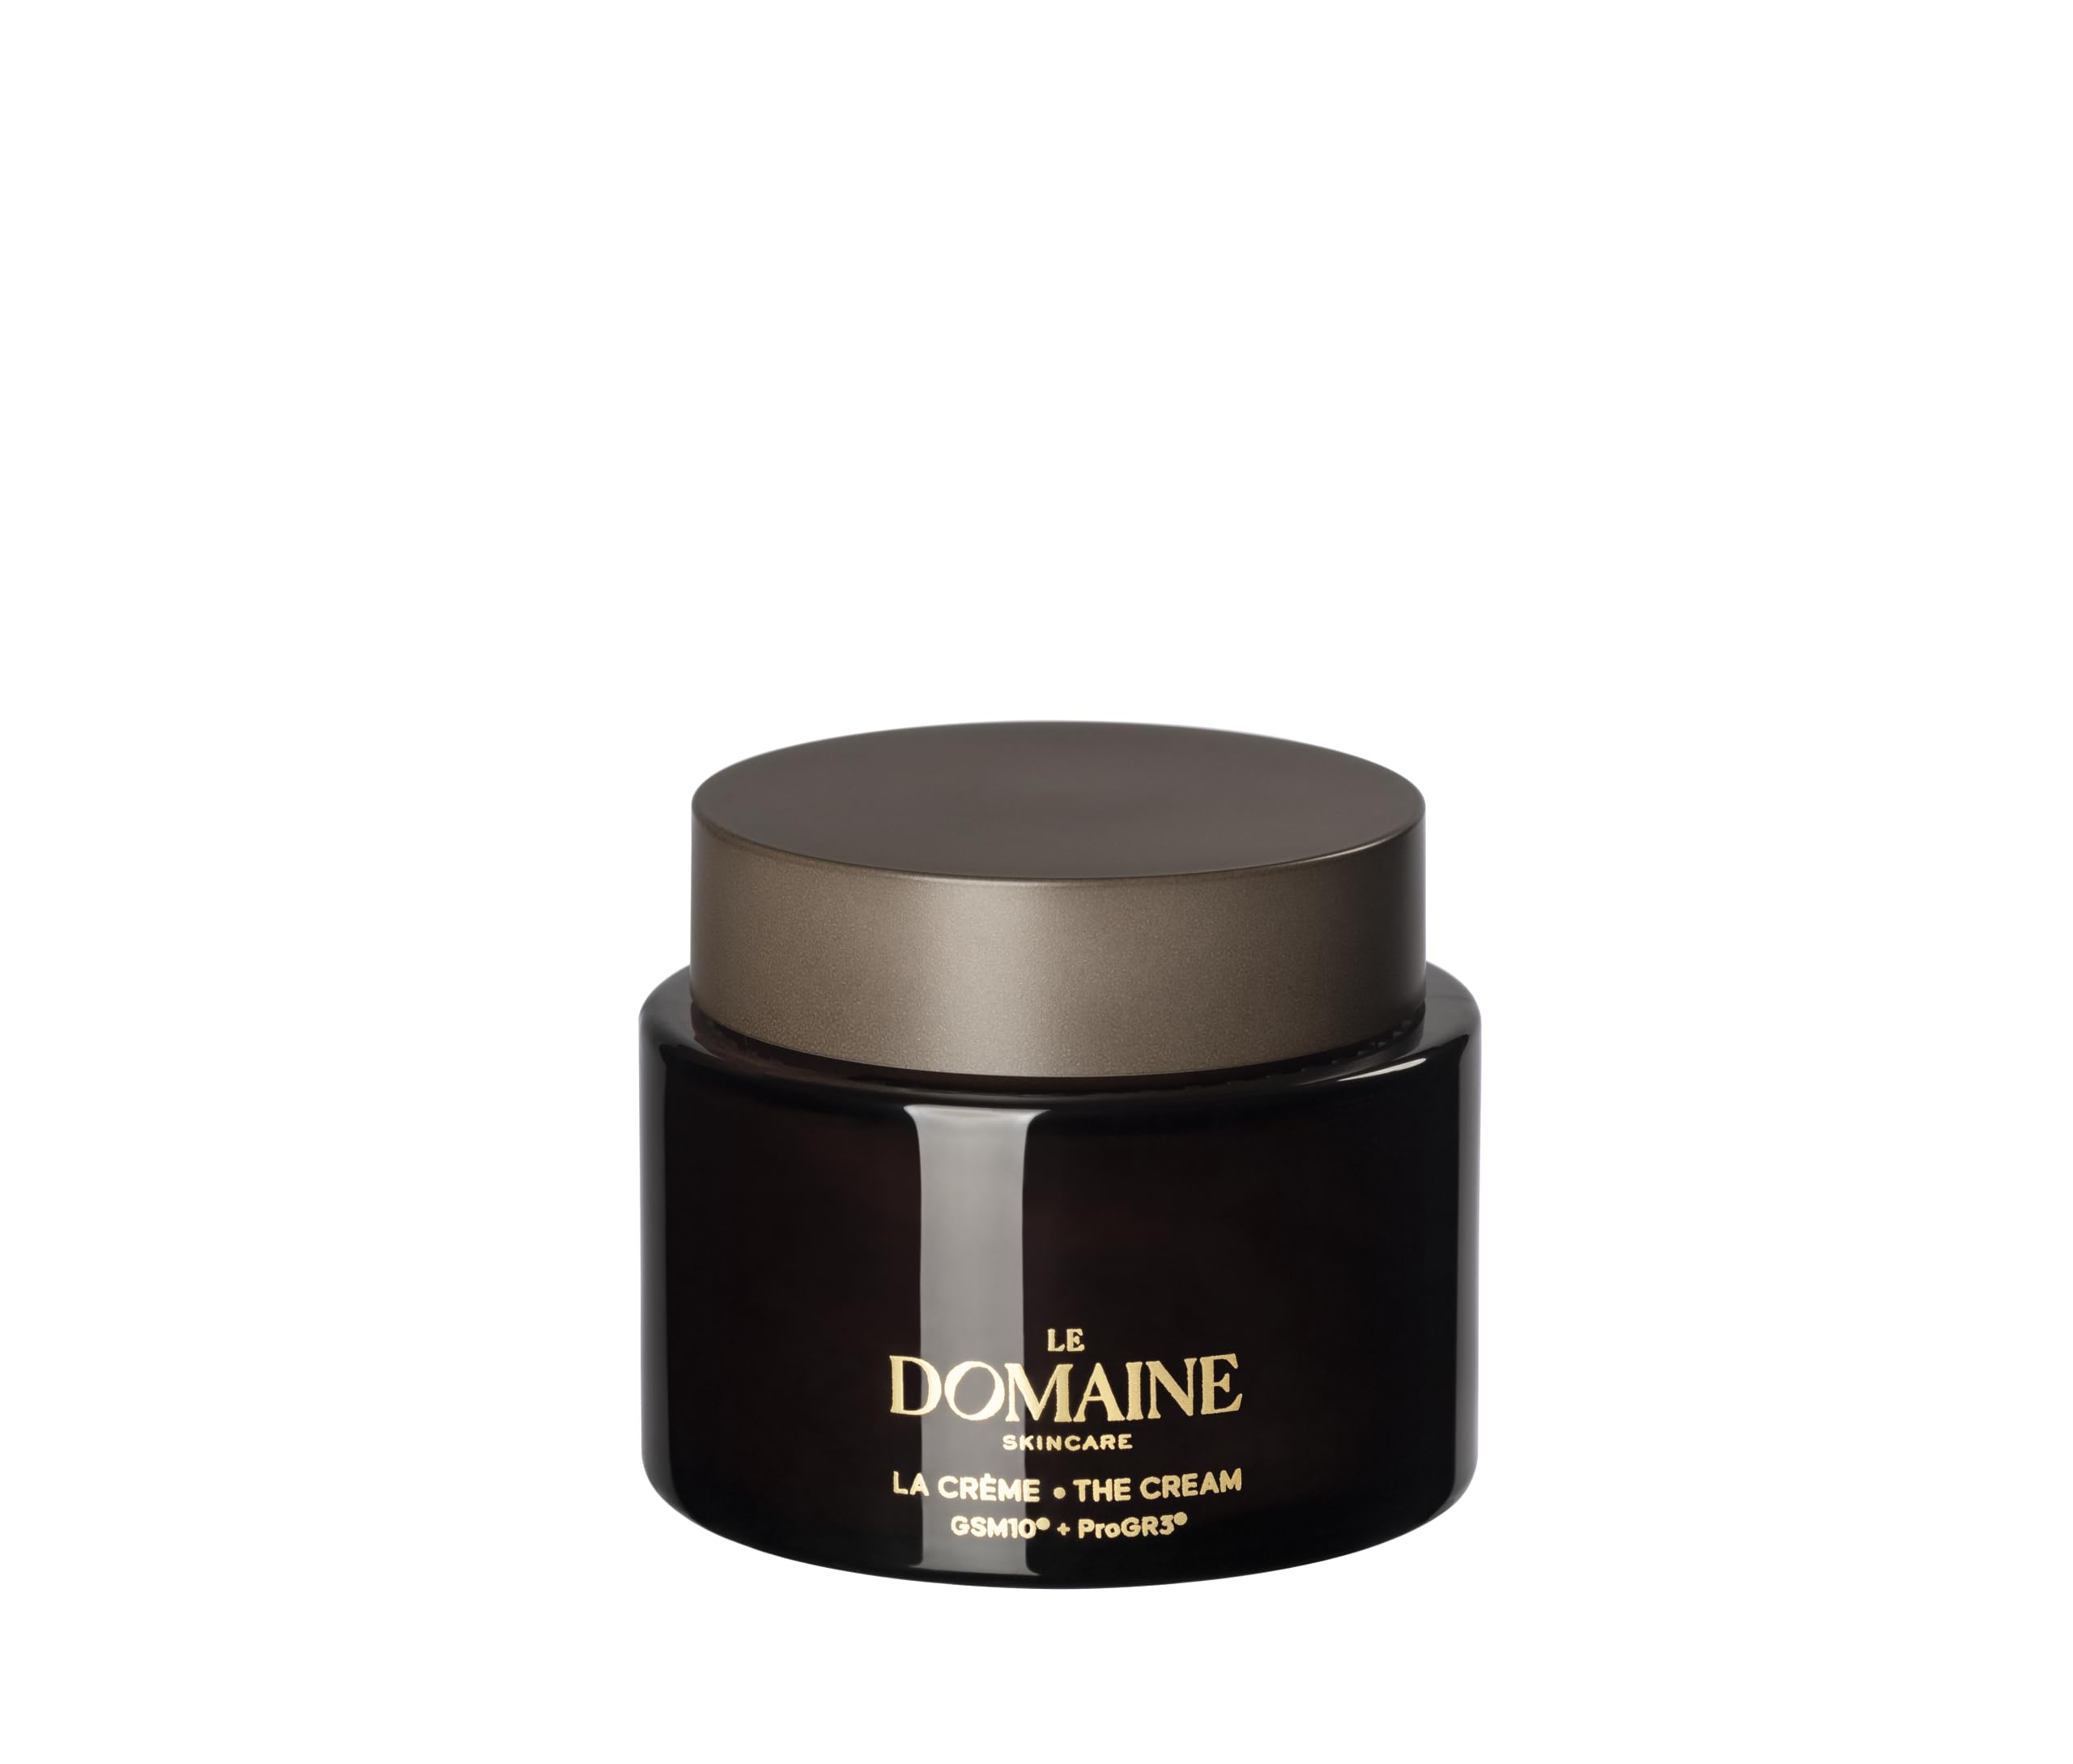 Le Domaine Luxury Face Cream | Anti-Aging Whipped Moisturizer | Hydrating Shea Butter & Patented ProGR3® Treat Wrinkles & Dry Skin | Day to Night Cream | 50ml